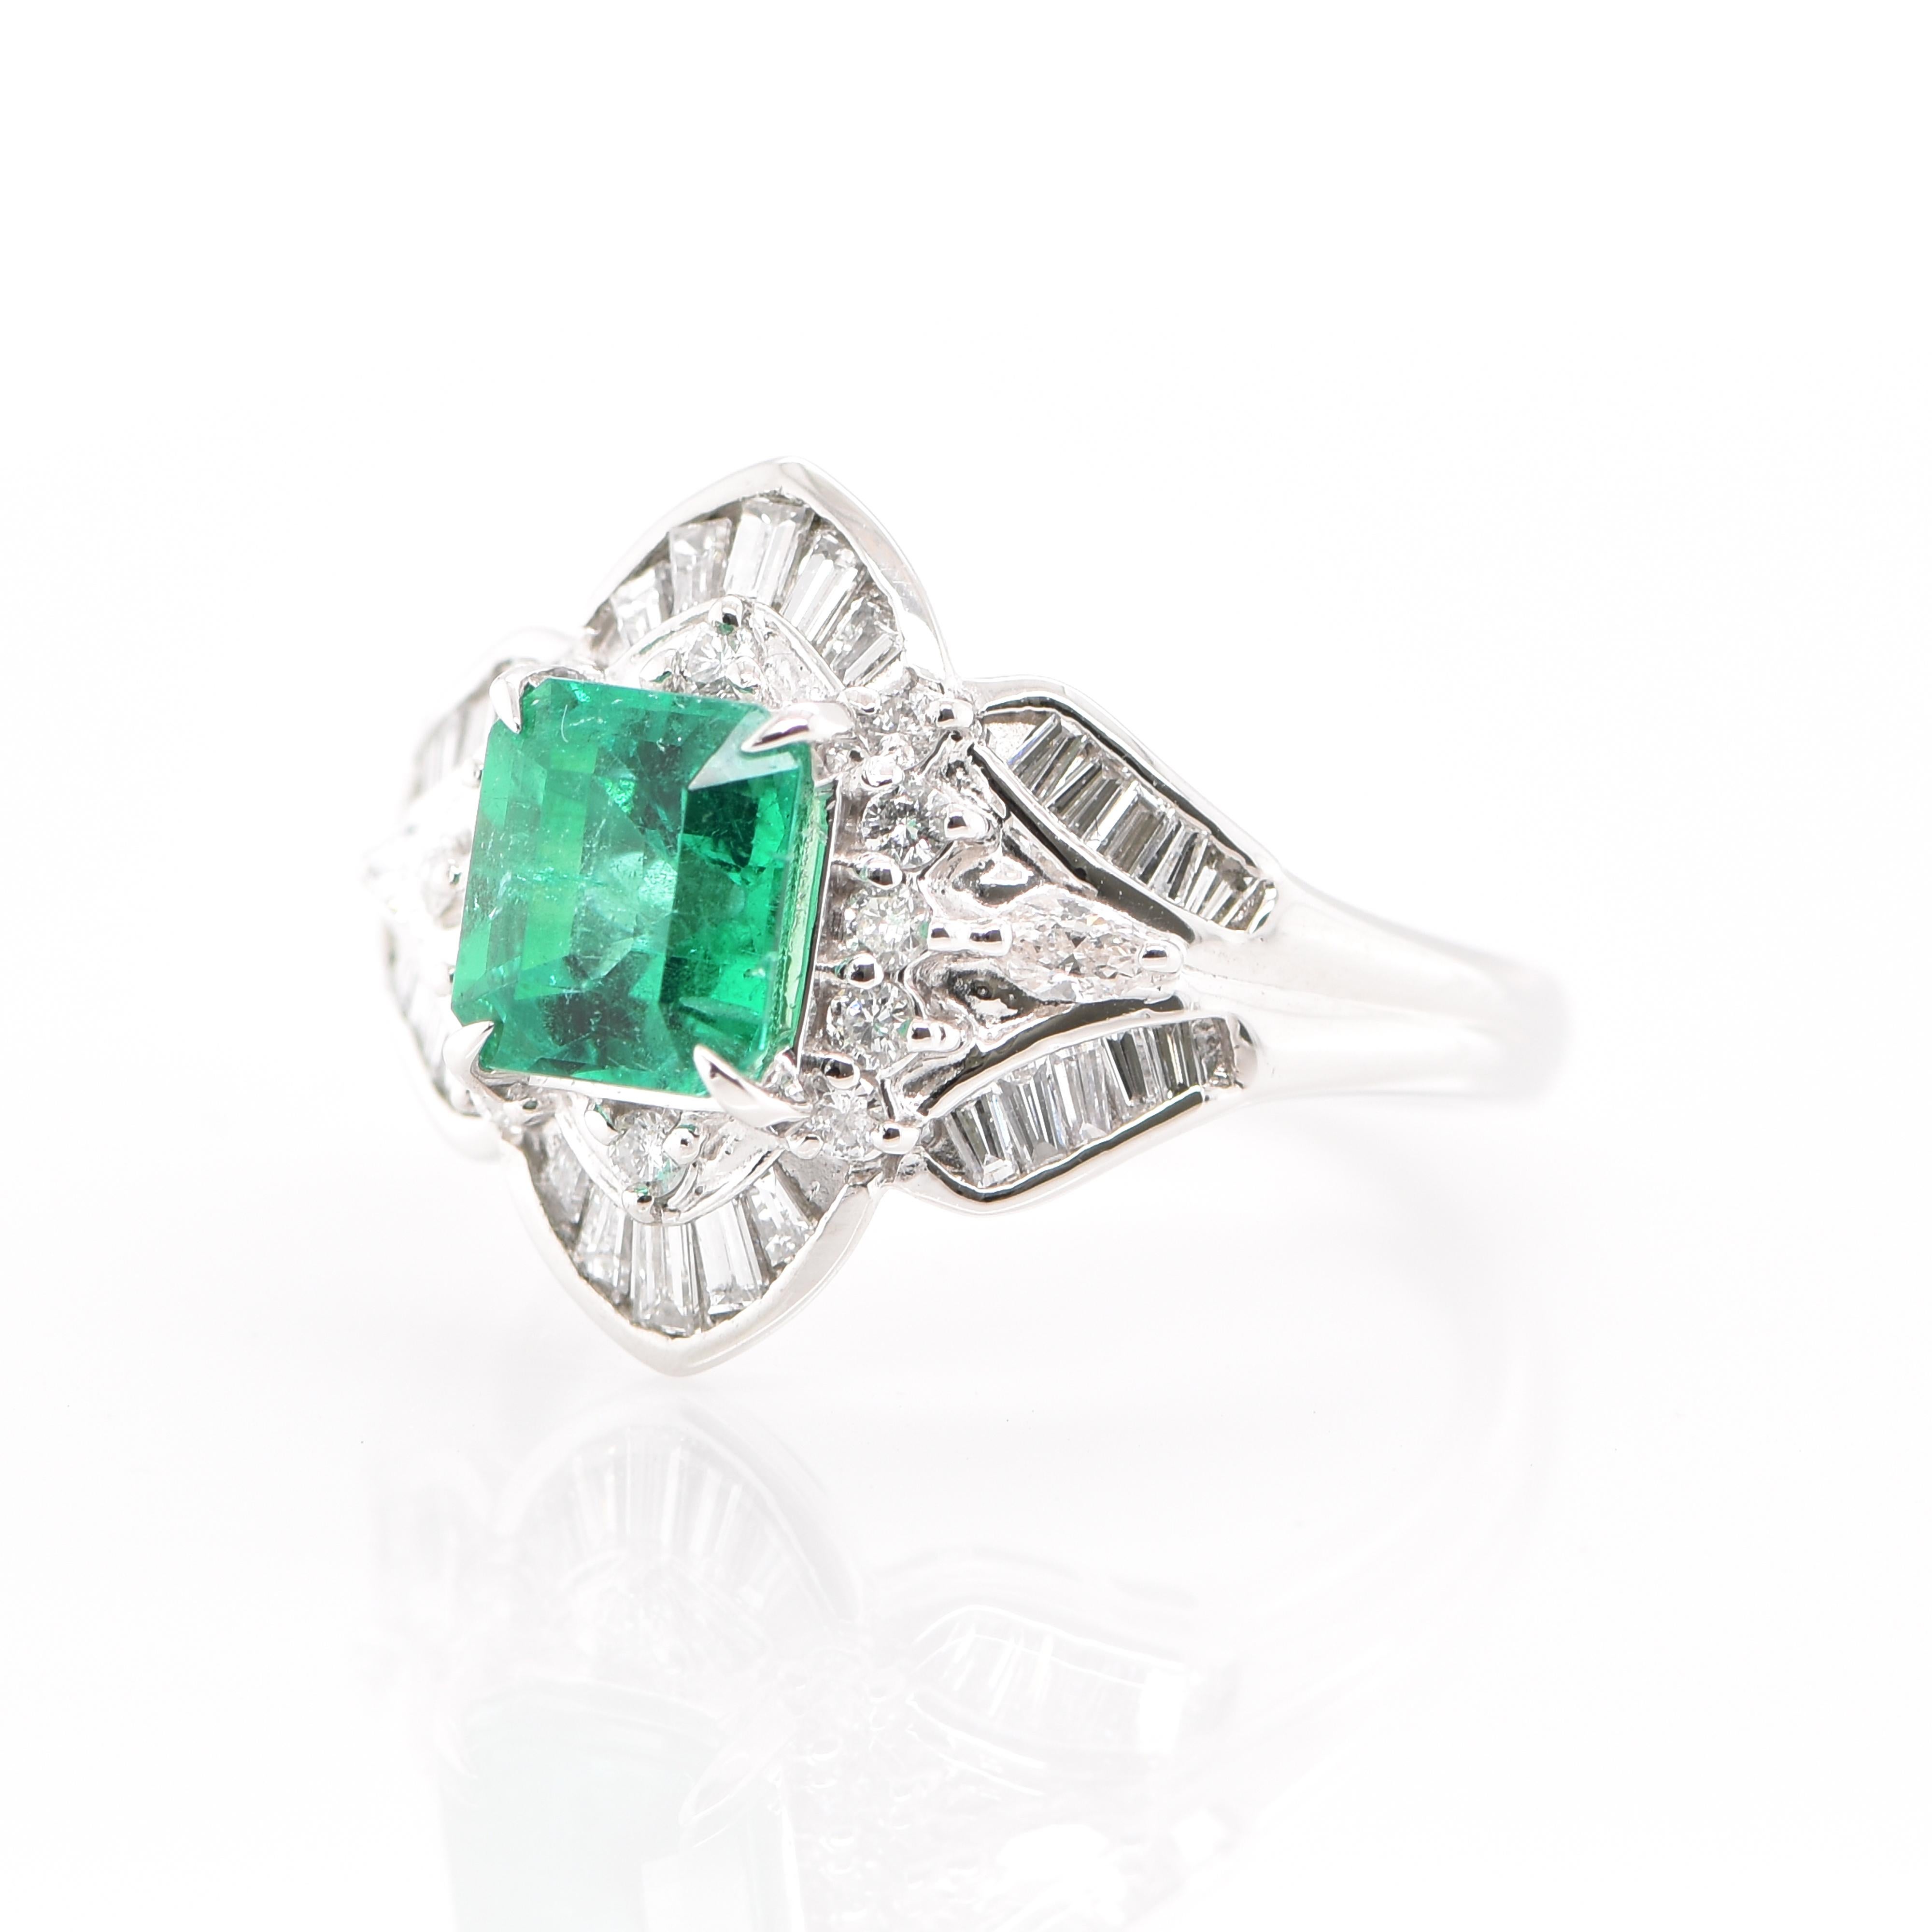 A stunning Art Deco Styled Cocktail Ring featuring a 1.44 Carat Emerald and 0.68 Carats of Diamond Accents set in Platinum. People have admired emerald’s green for thousands of years. Emeralds have always been associated with the lushest landscapes